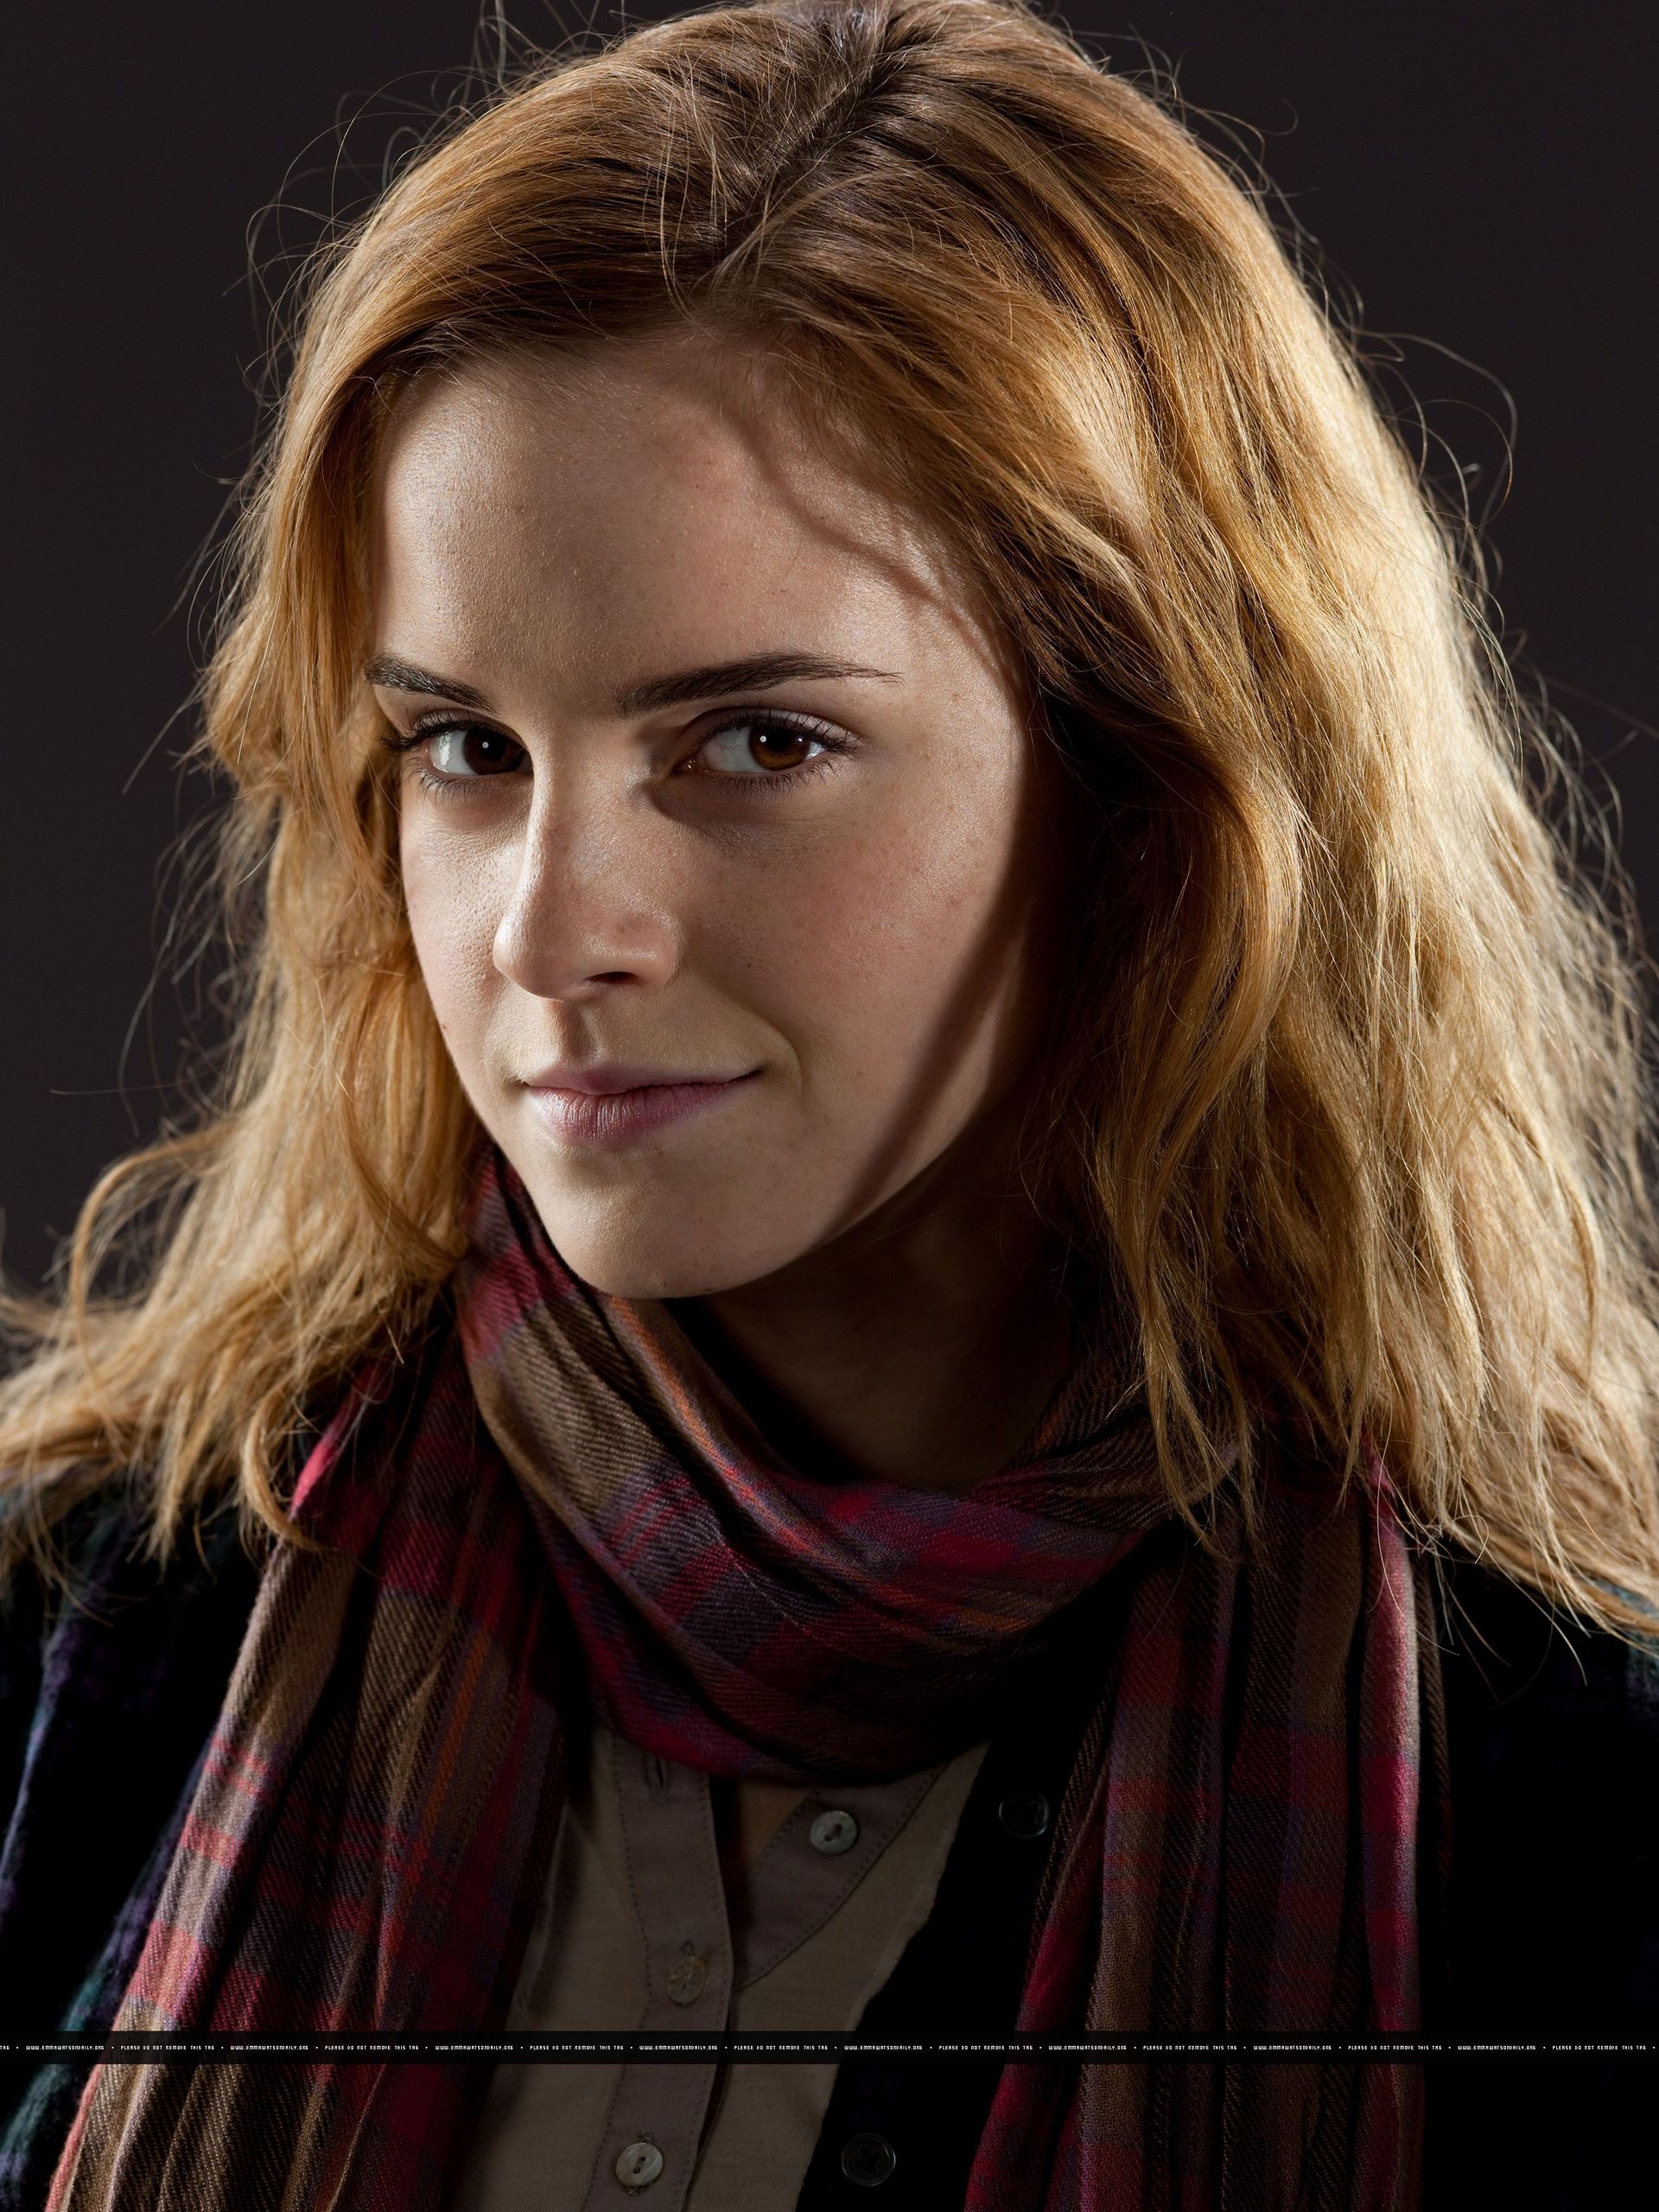 New promotional pictures of Emma Watson for Harry Potter and the Deathly Hallows part 1